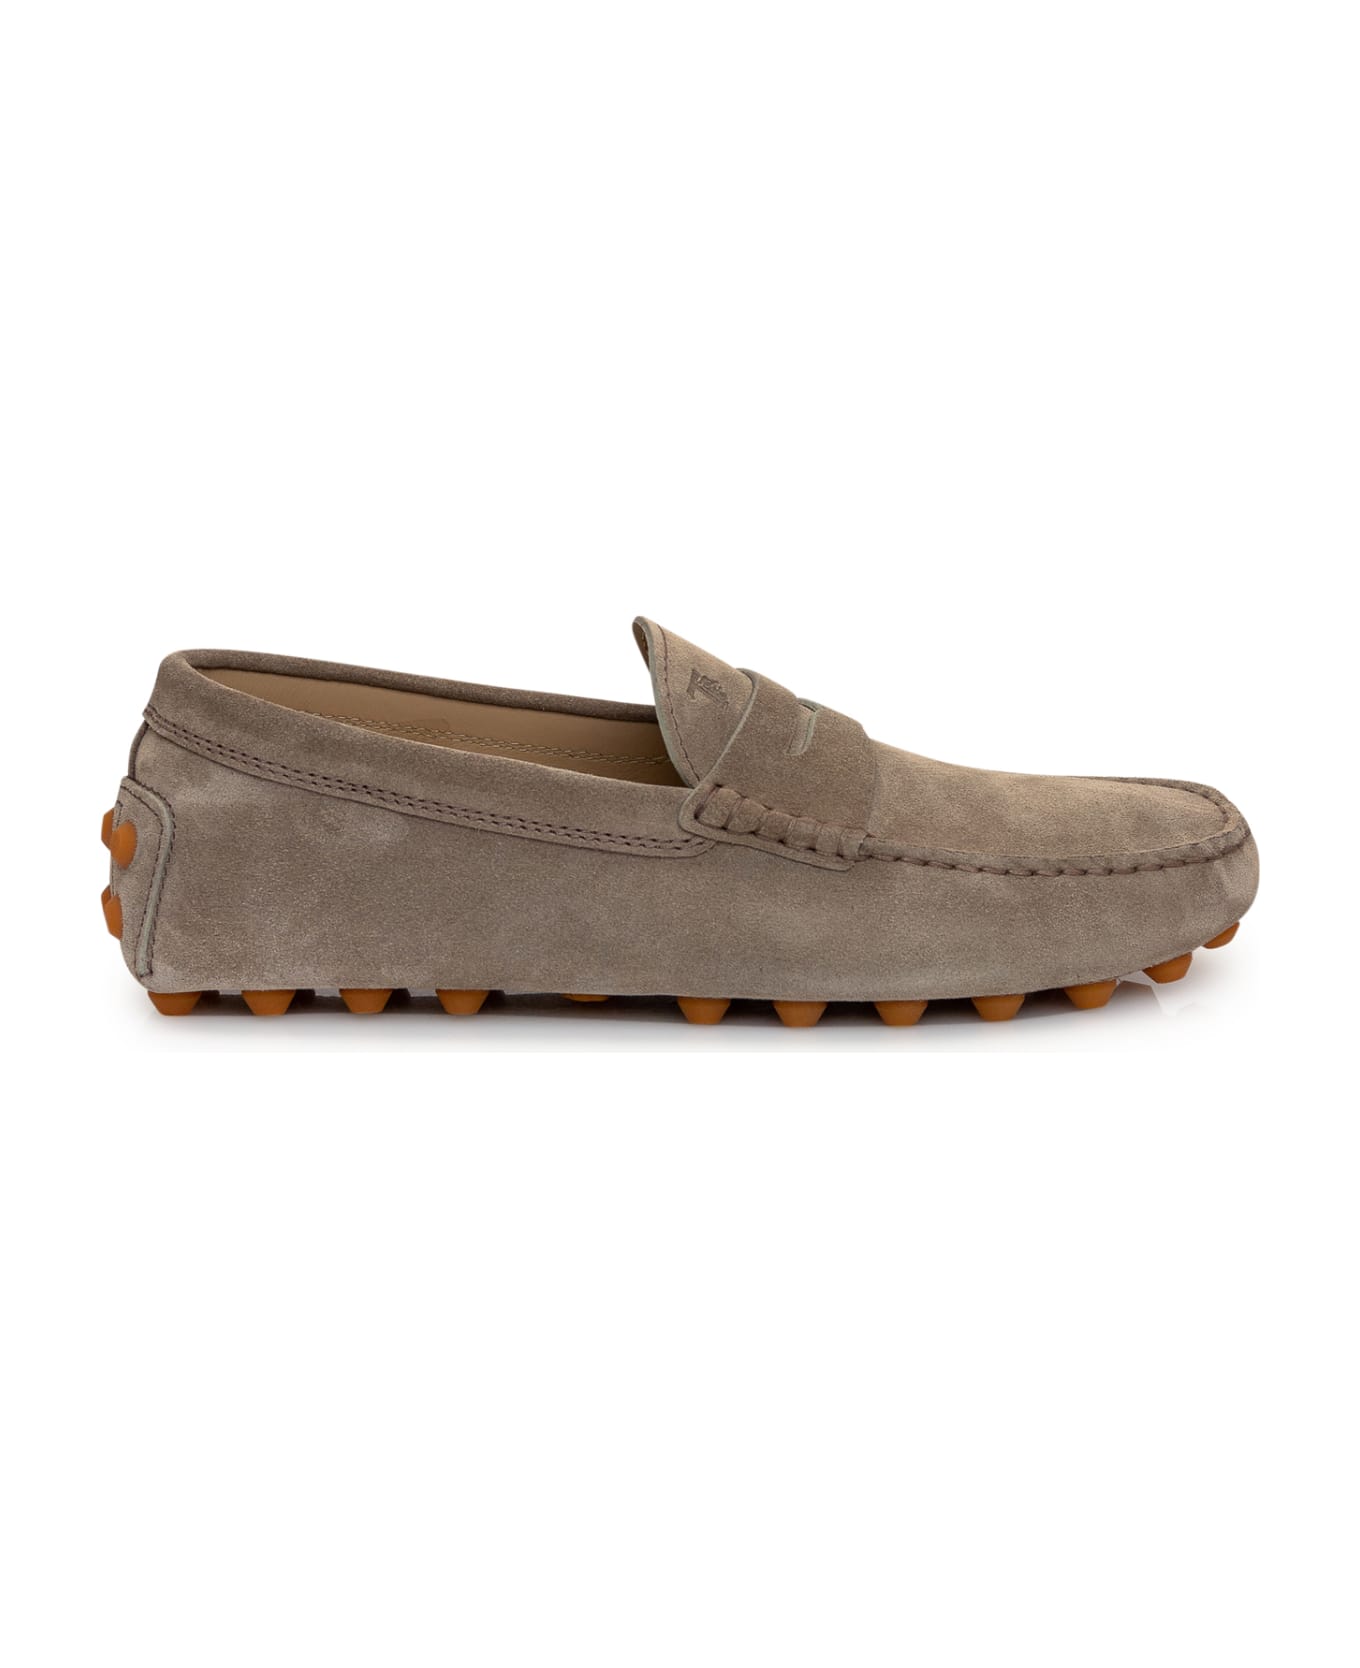 Tod's Gommino Moccasin - Stone